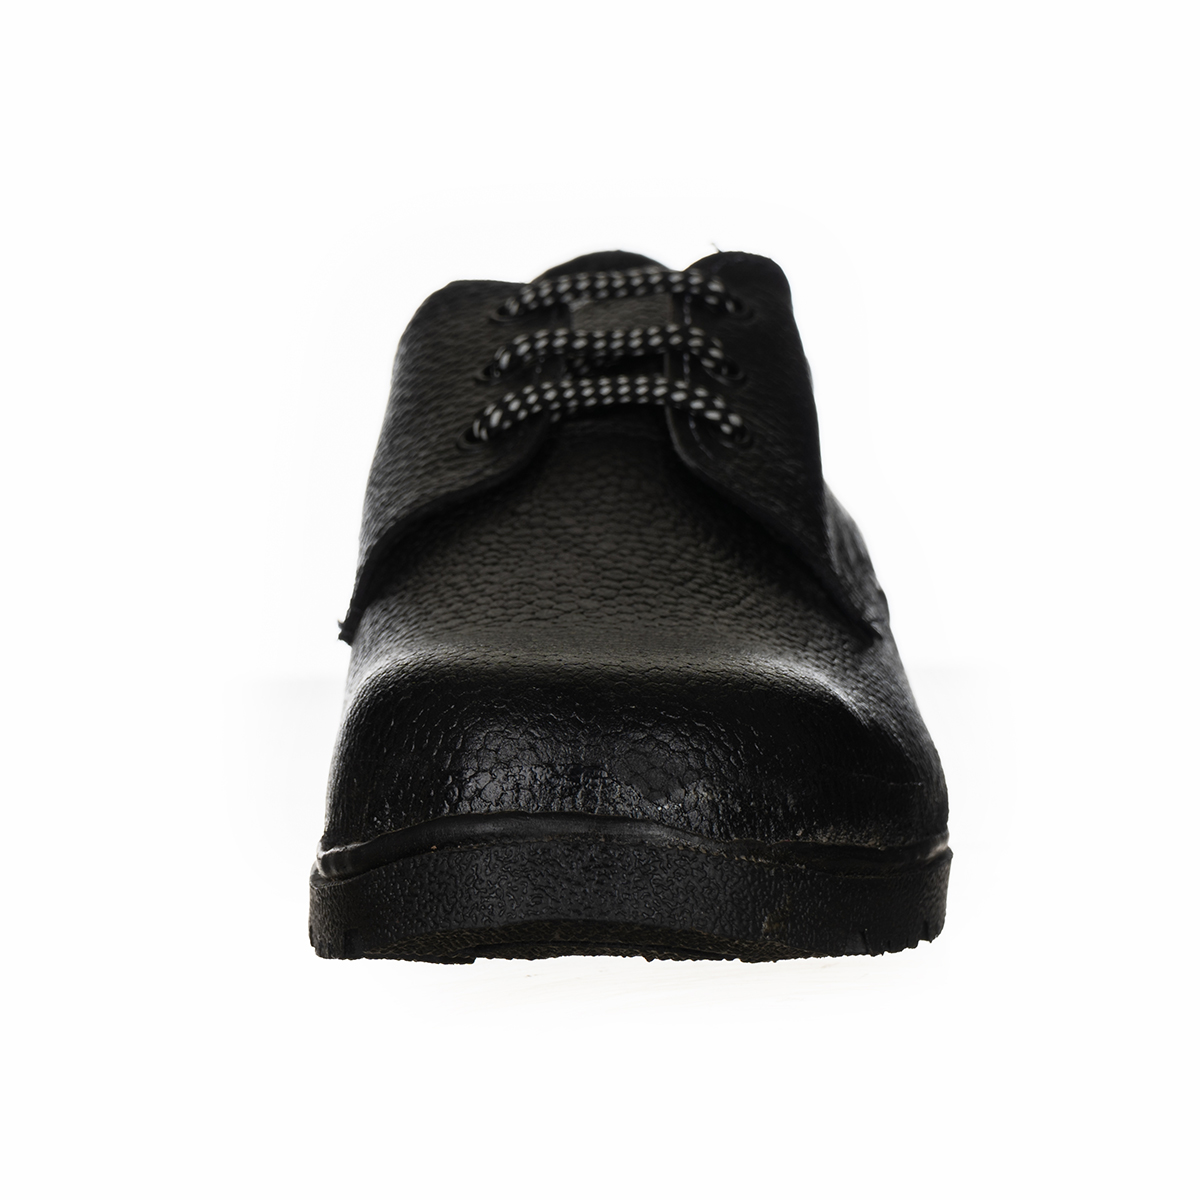 DSK Rambo Black Leather Safety Shoes Manufacturers, Suppliers in Pune